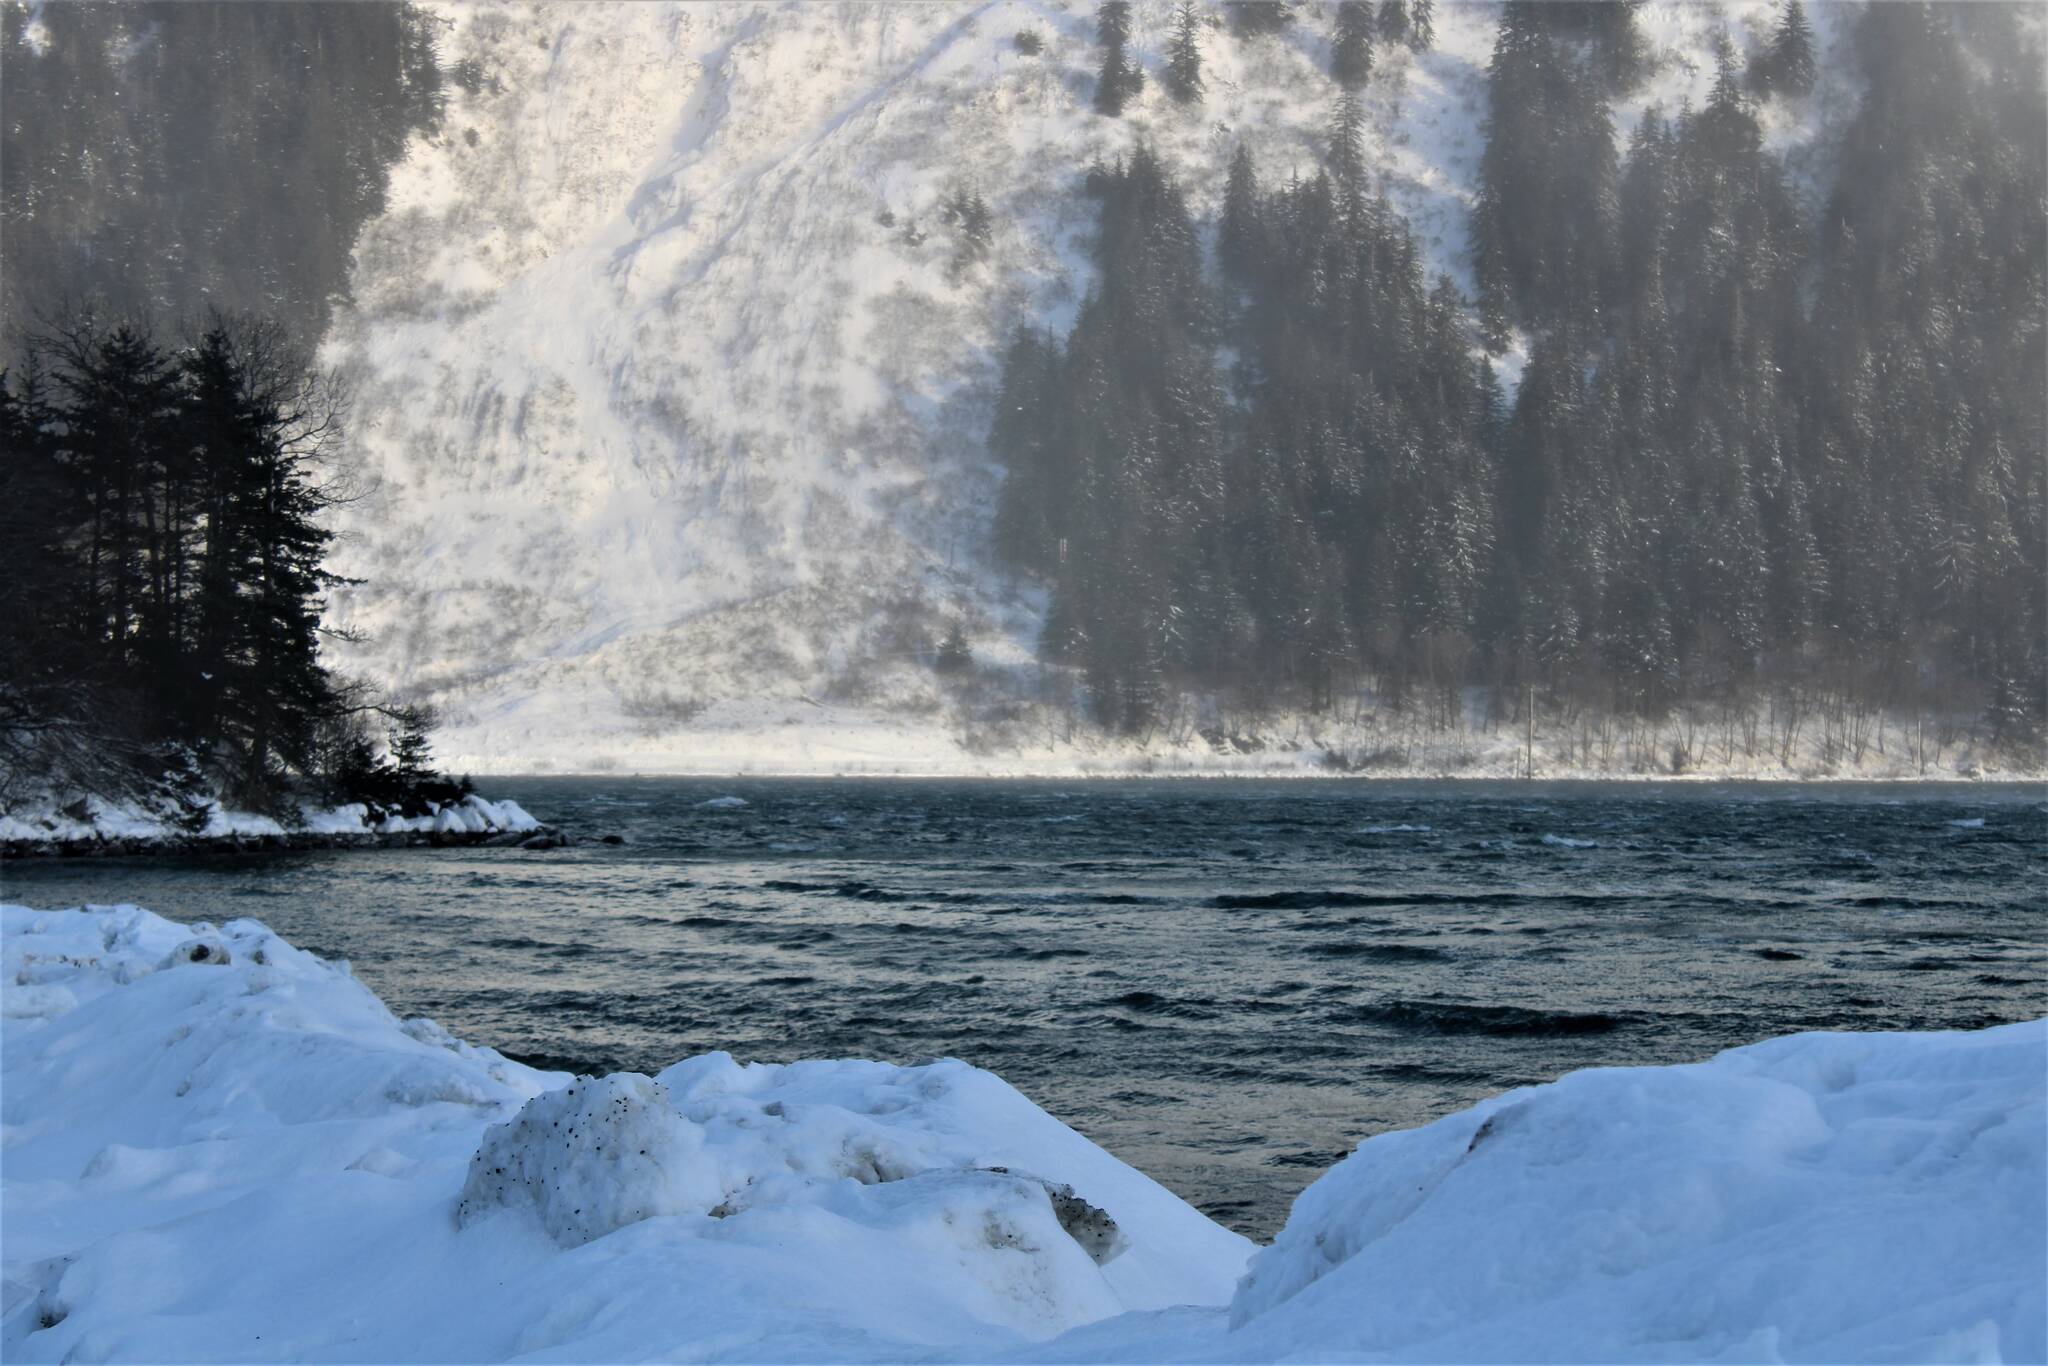 Waves pummel Sandy Beach on Douglas on Jan. 3. Avalanche debris from a weekend slide on Thane Road is visible across the Gastineau Channel. The avalanche delayed crews in responding to a power outage further down Thane Road. (Dana Zigmund/Juneau Empire)